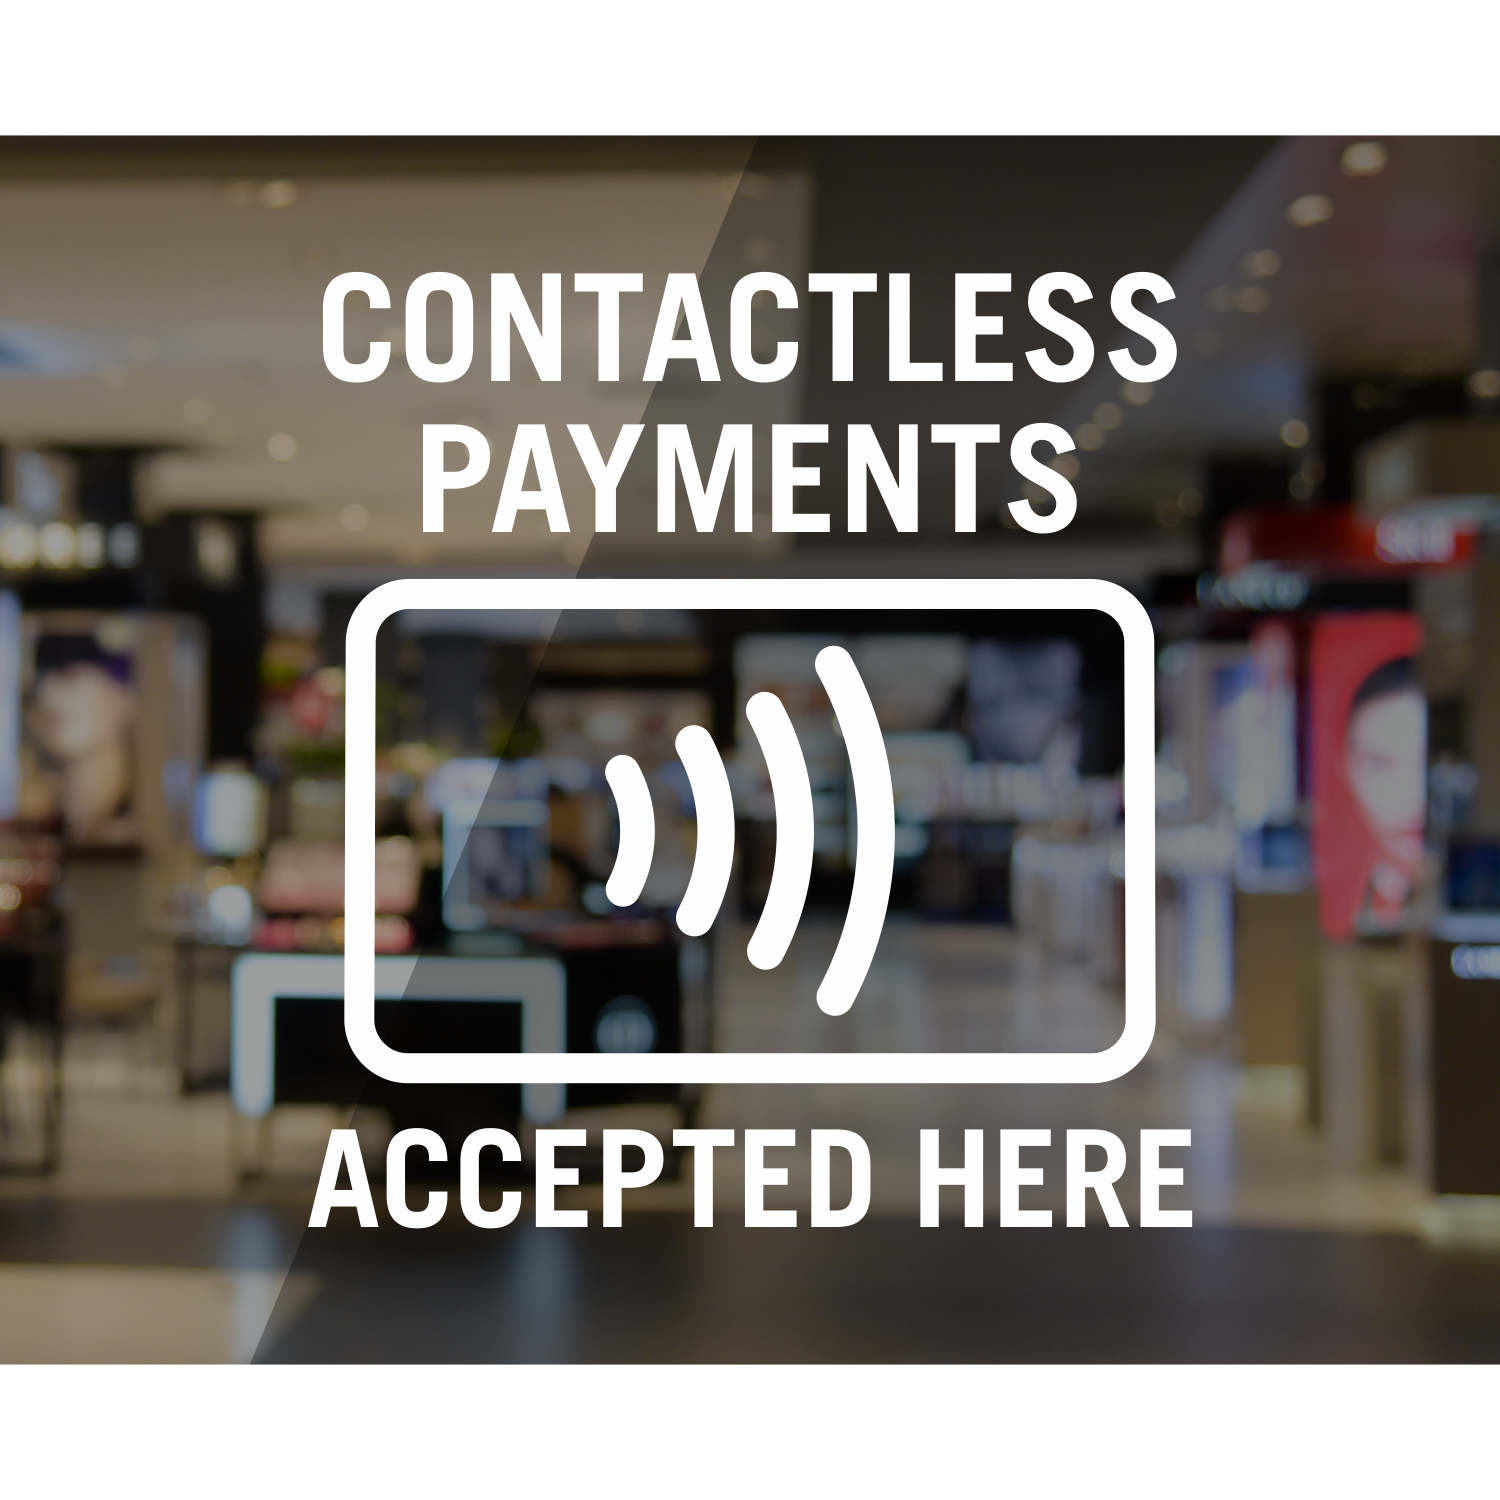 CONTACTLESS PAYMENT WINDOW STICKER DECAL CONTACT LESS EARN MORE REVERSE  FIT WIN 